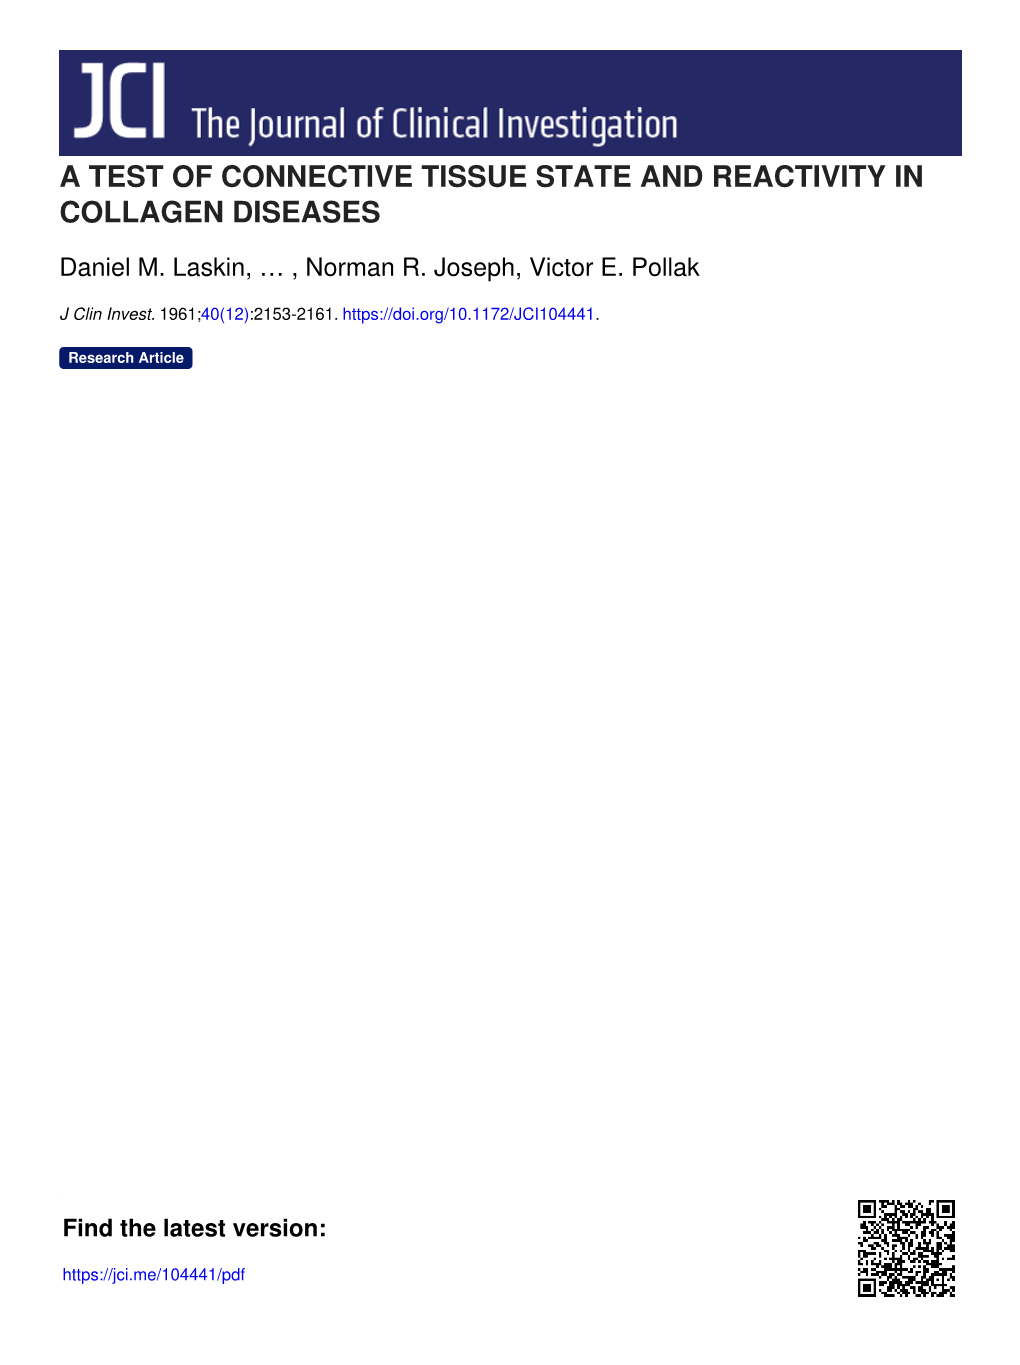 A Test of Connective Tissue State and Reactivity in Collagen Diseases